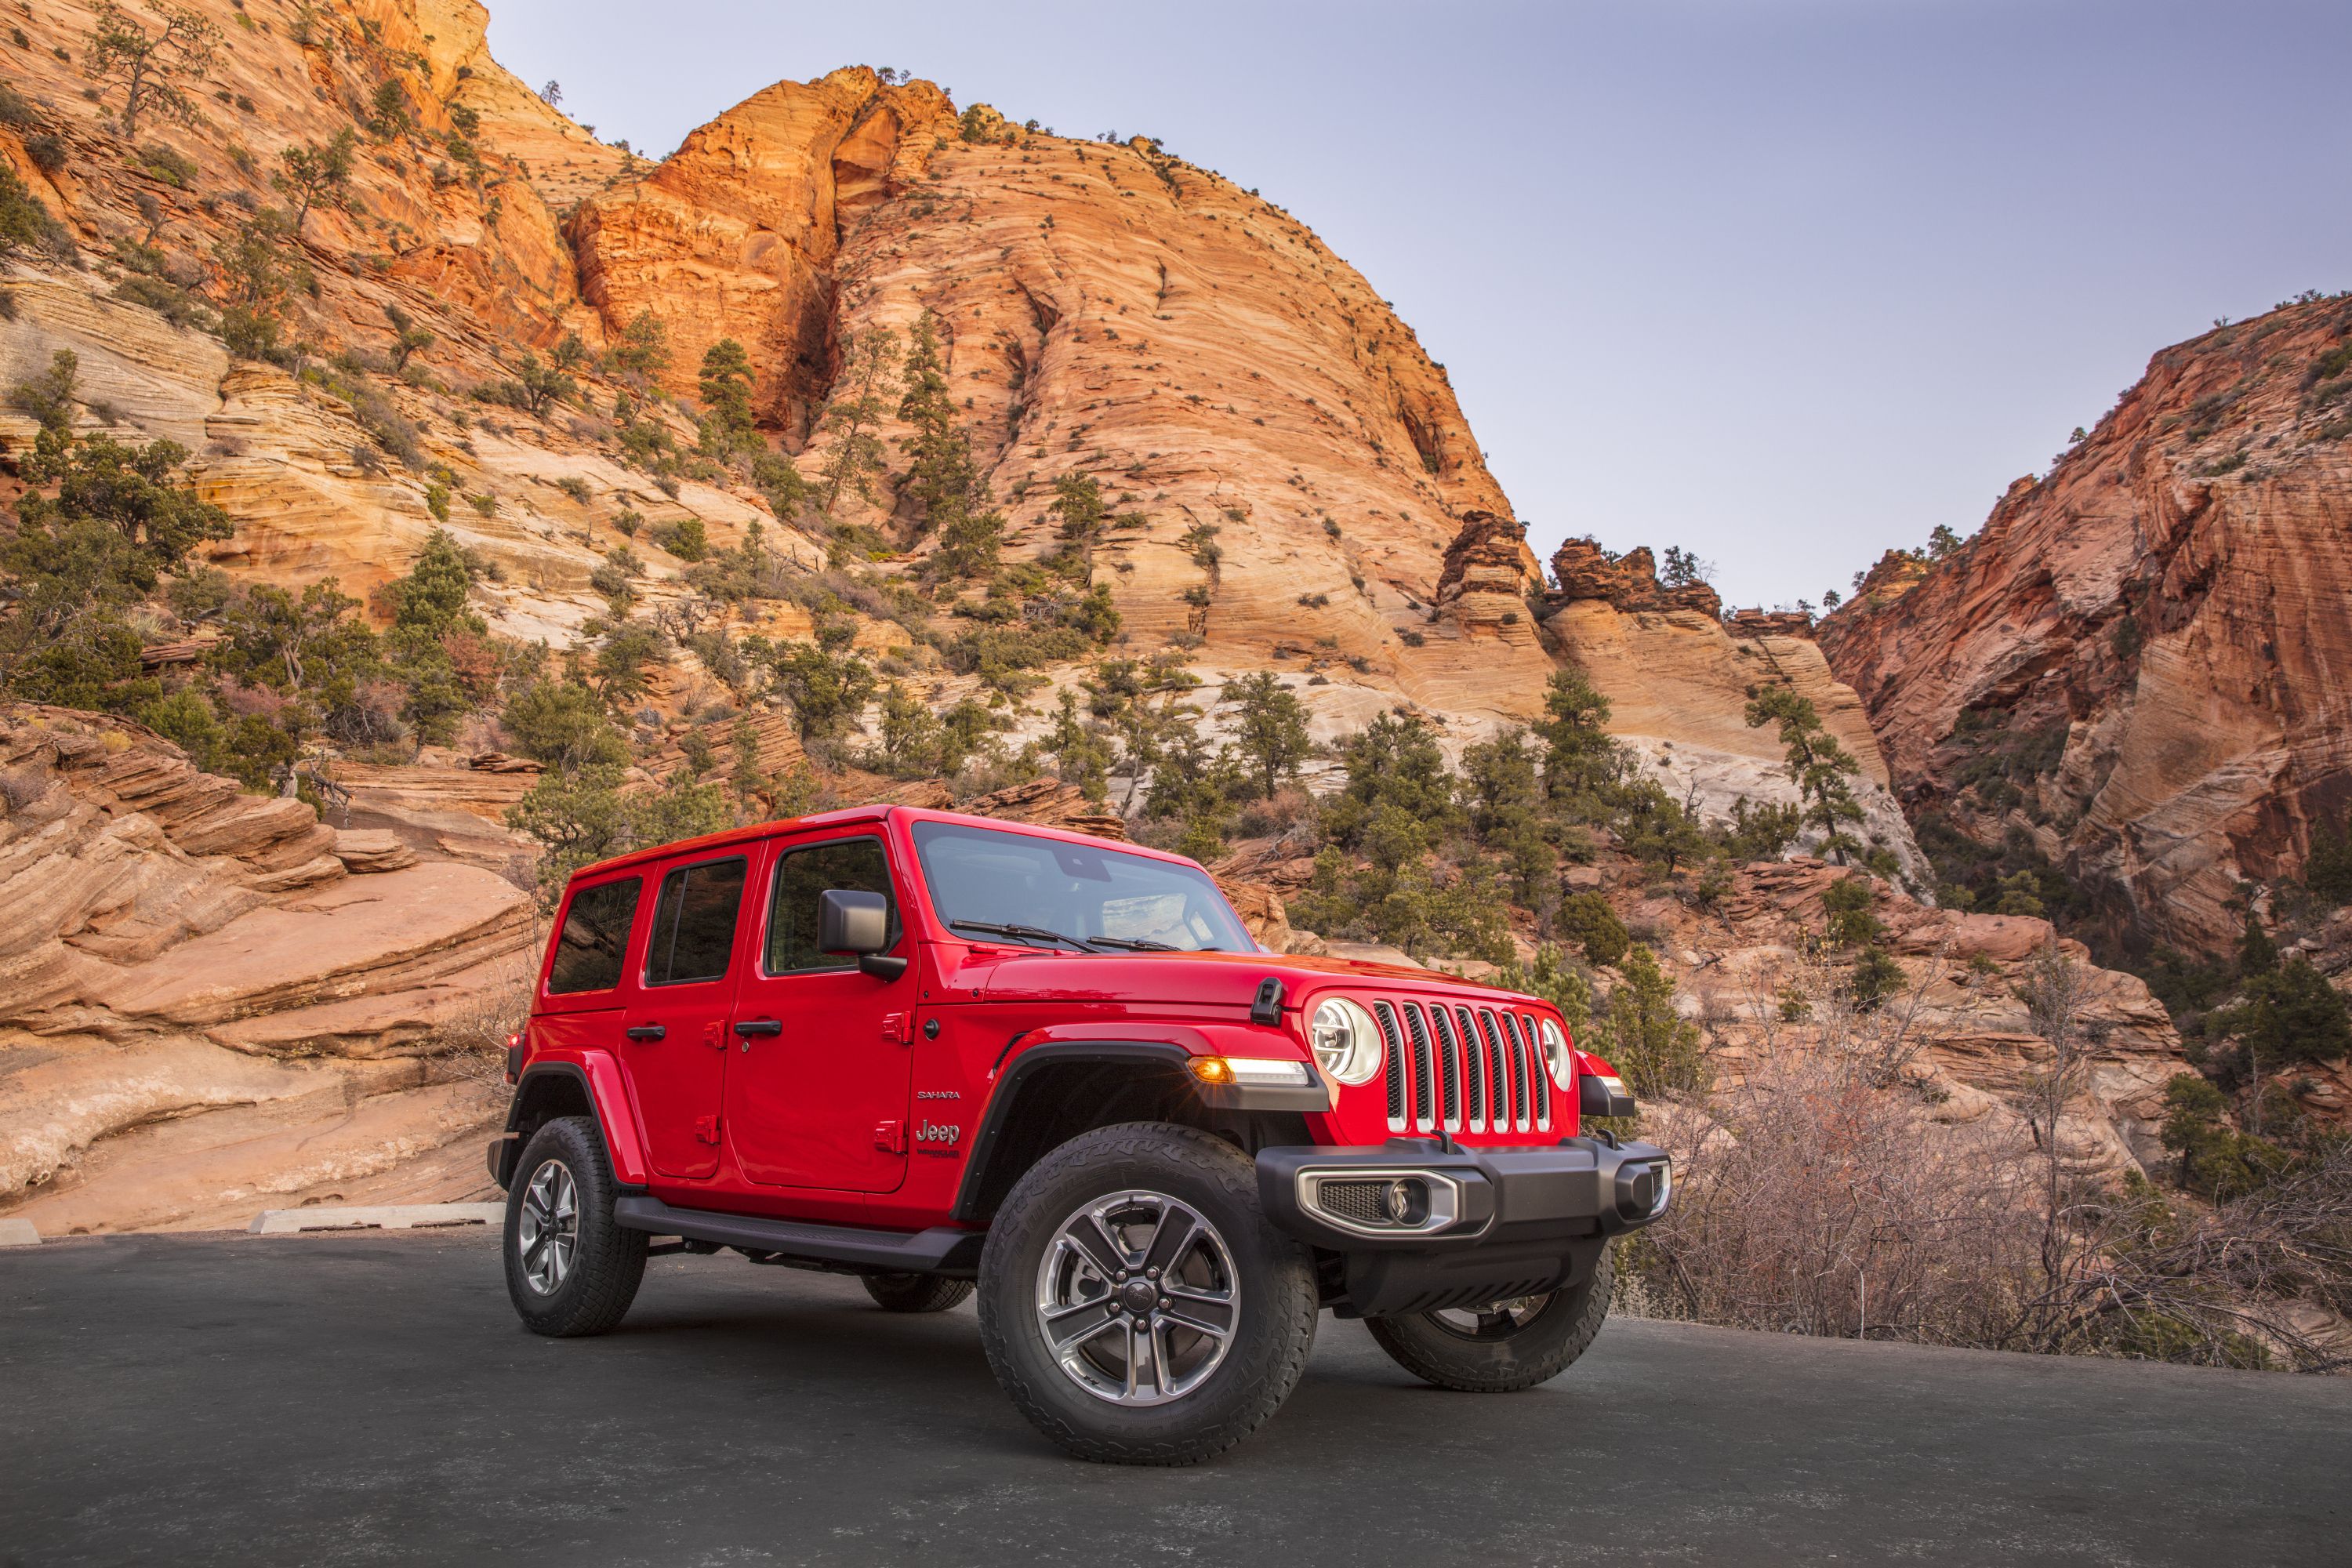 Jeep Wrangler Sahara review: mild update for more thrills